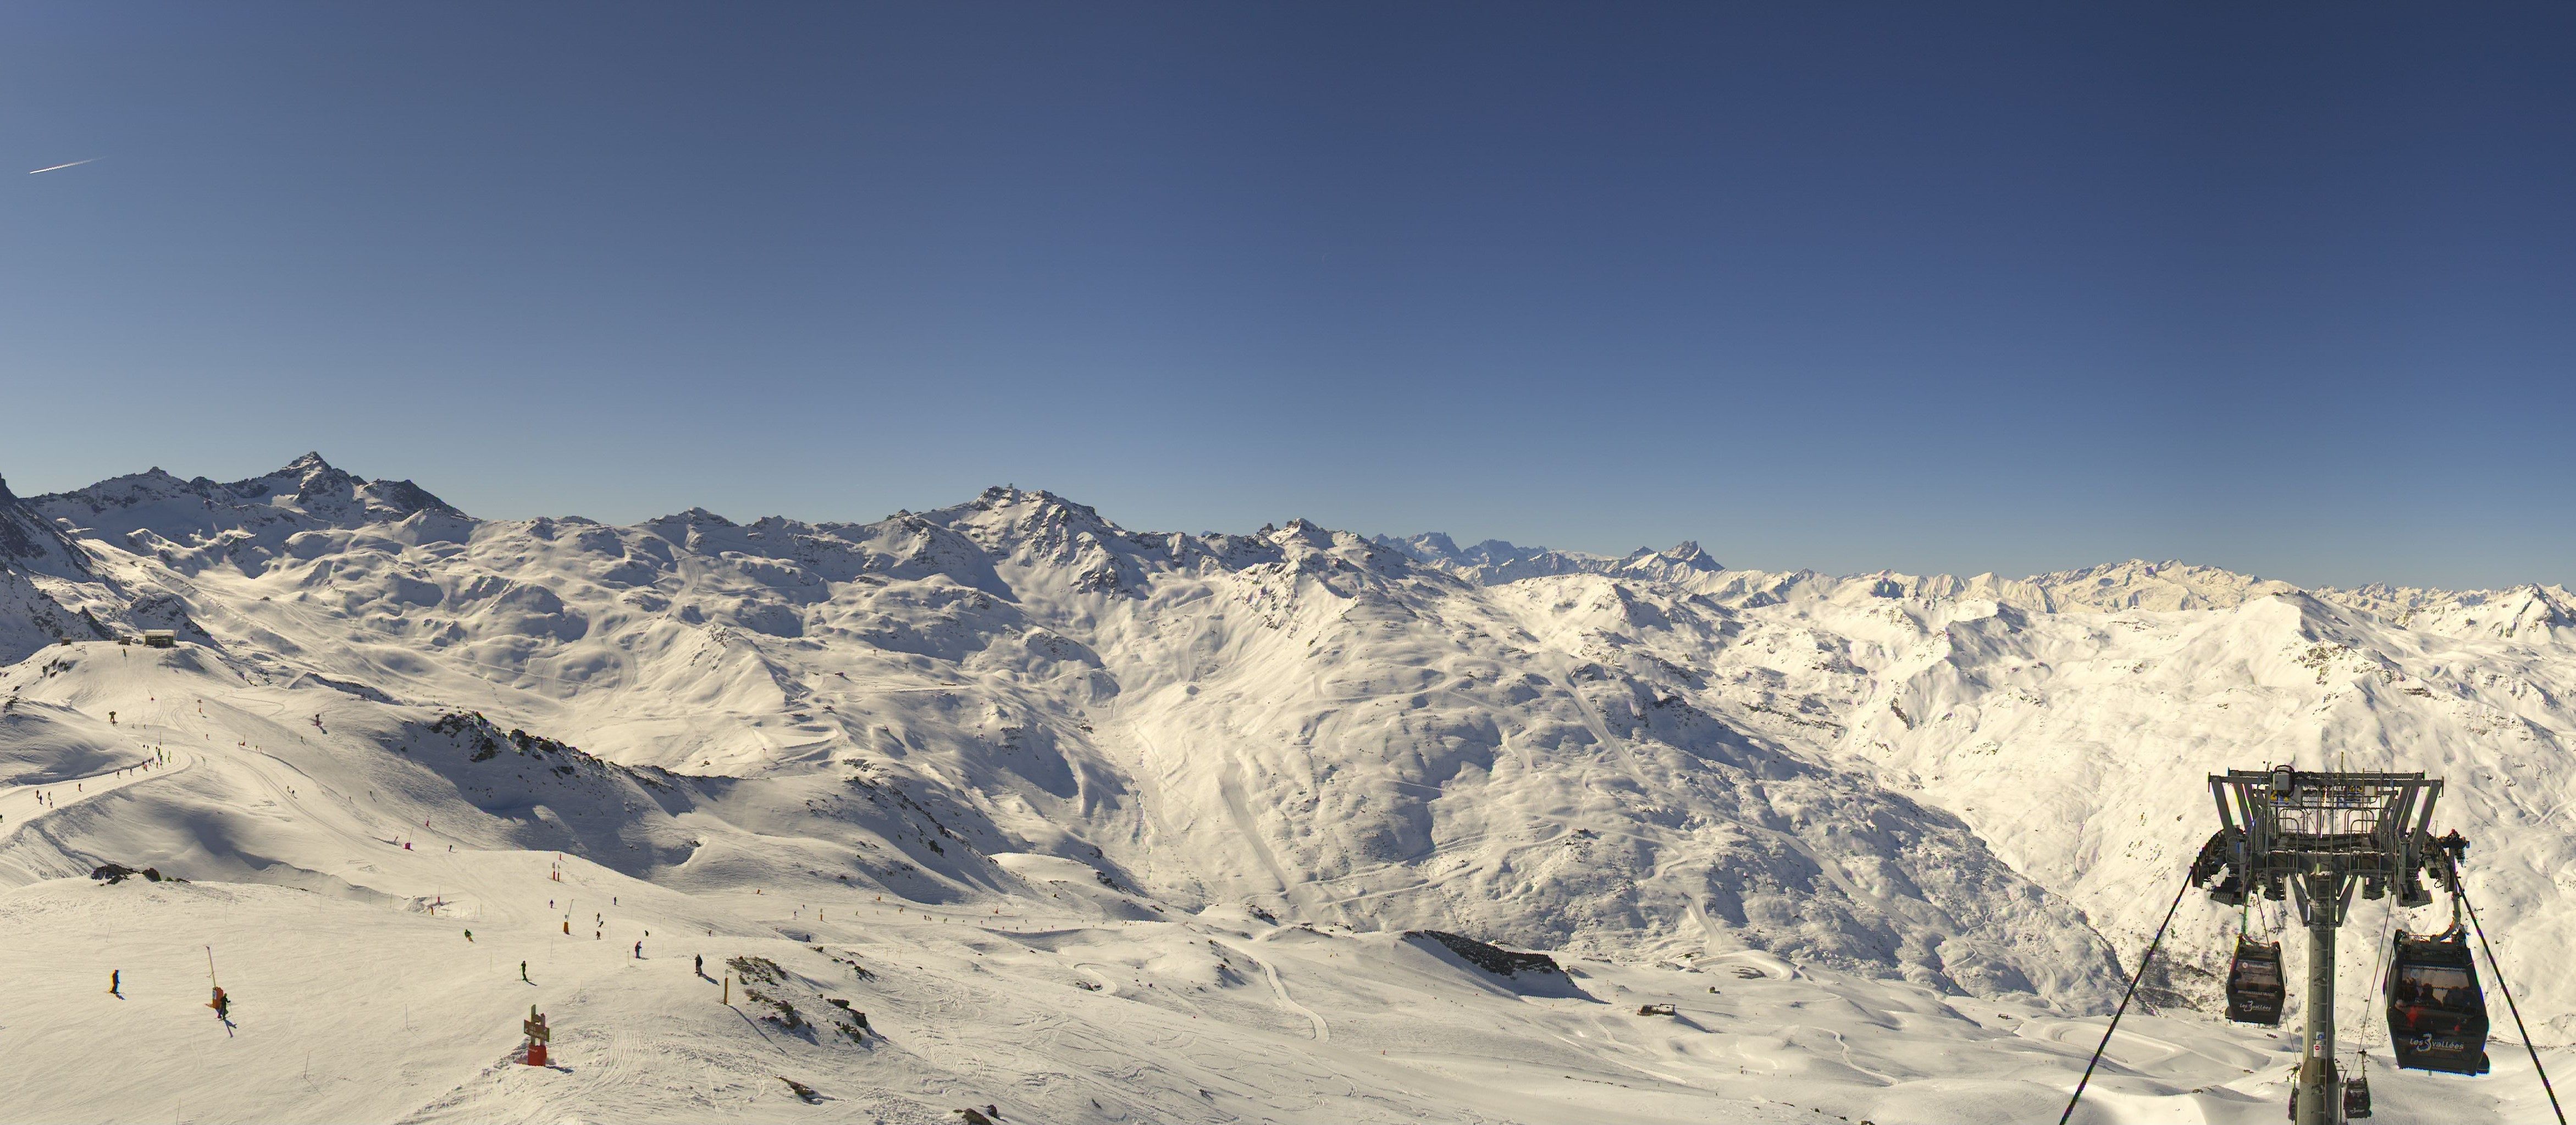 As so often this winter, the sun is shining in the West Alps (roundshot.com)